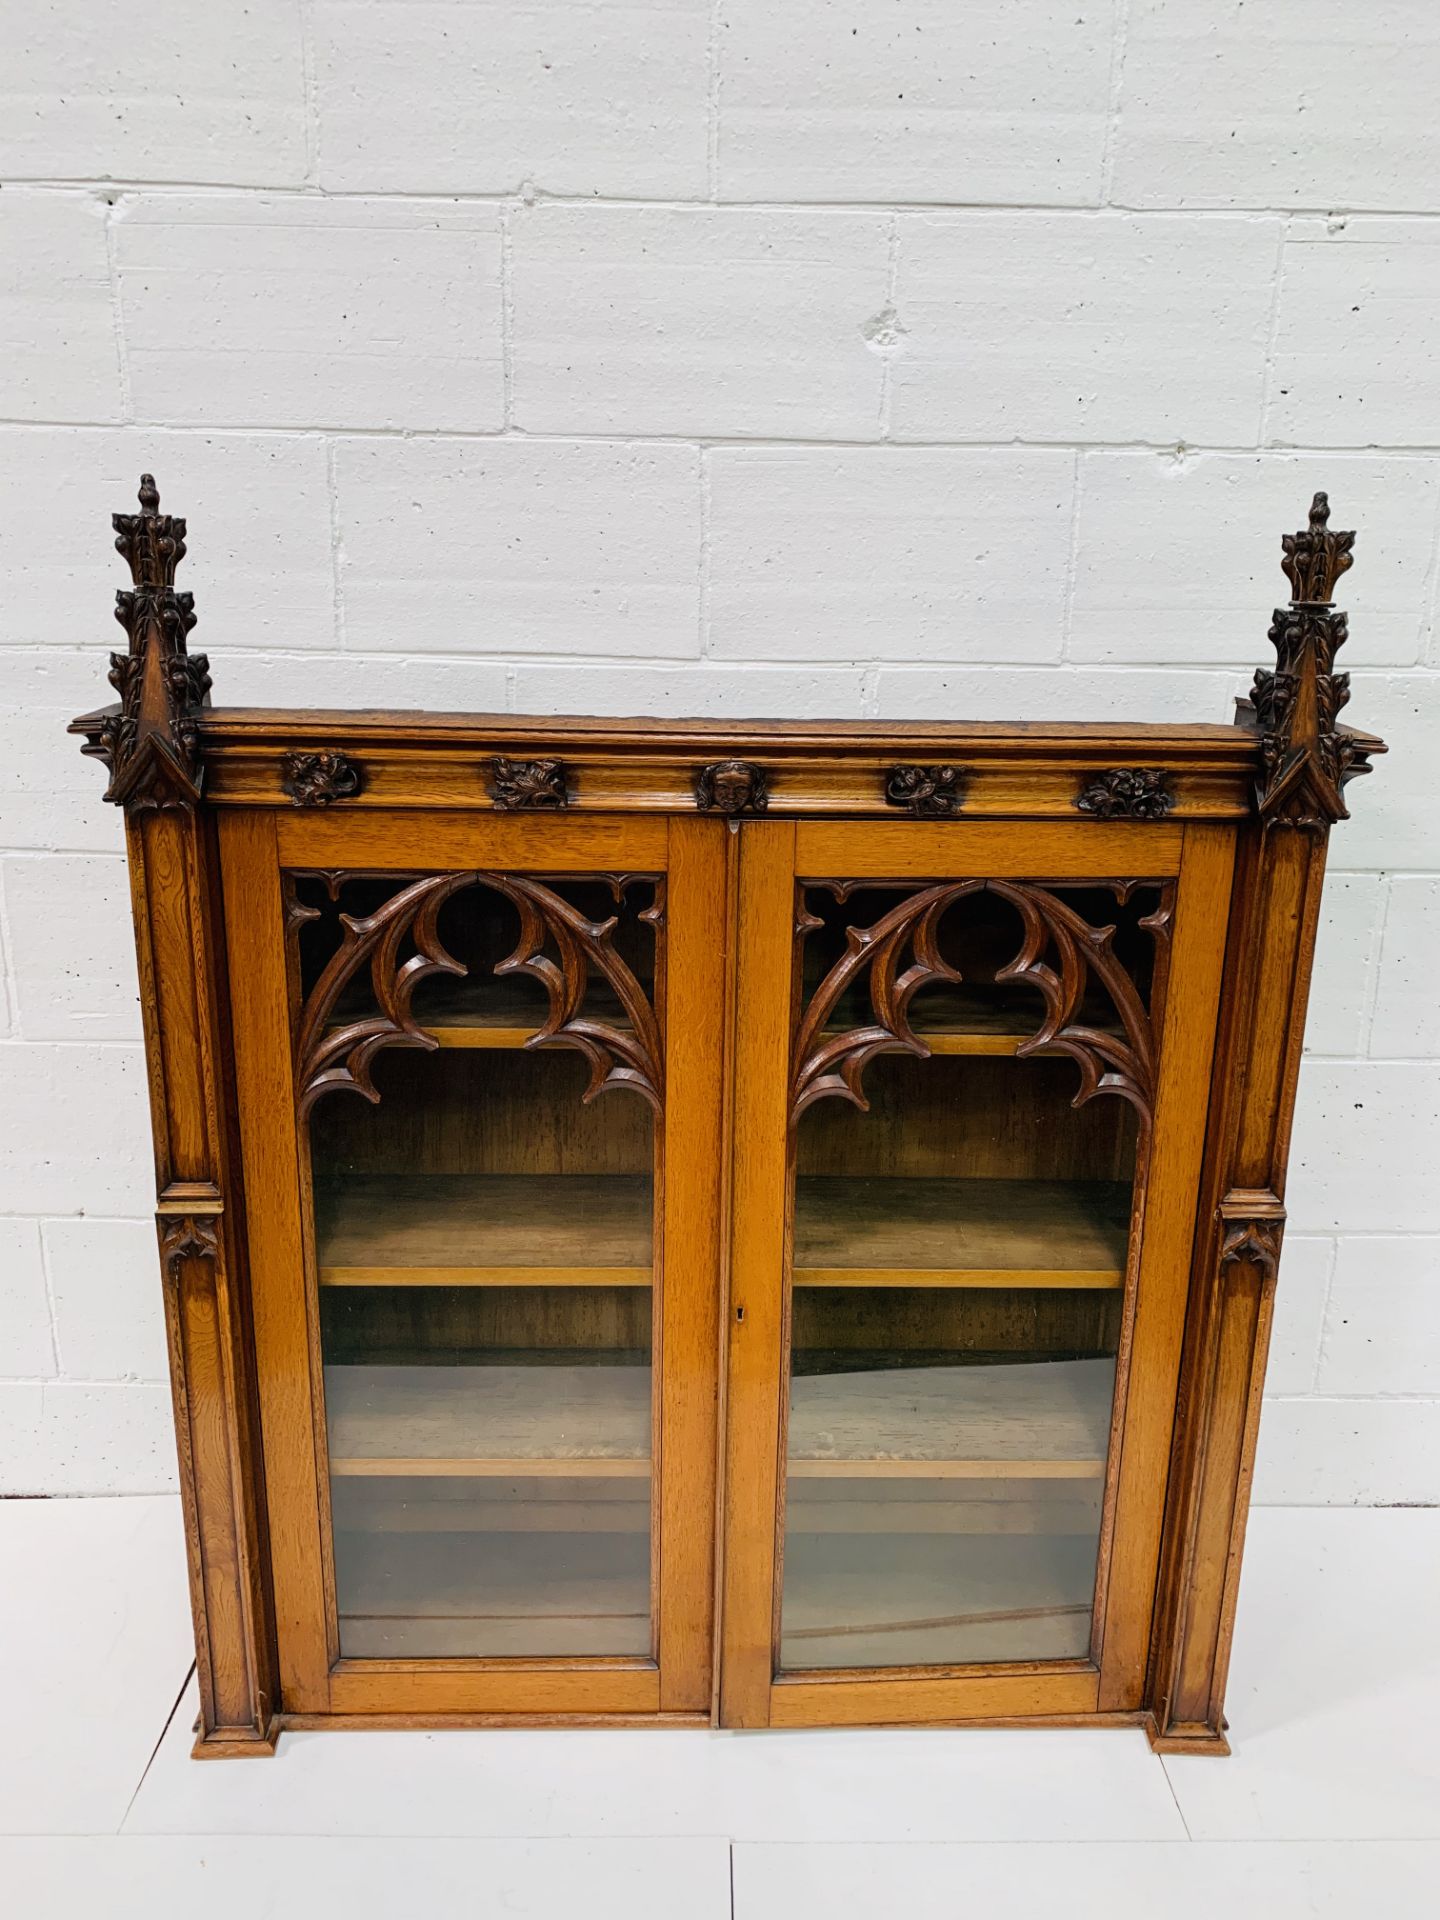 Victorian Gothic oak bookcase with glazed doors.